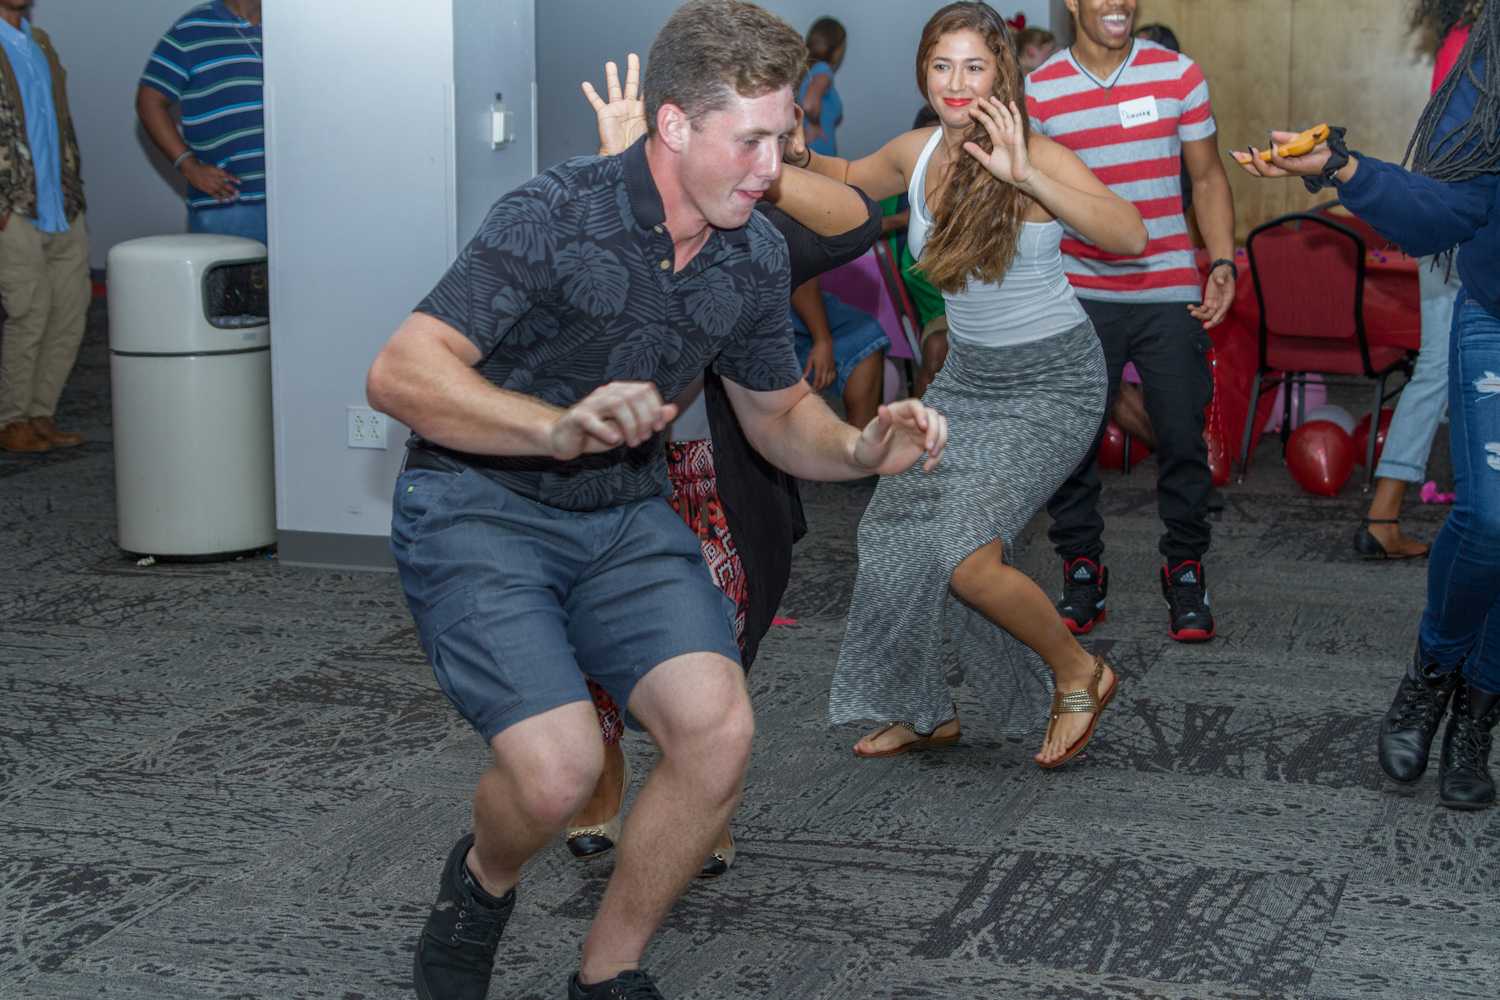 FAU students having a good time dancing at the “I've Got The Hoots For” event on Feb. 6th. 